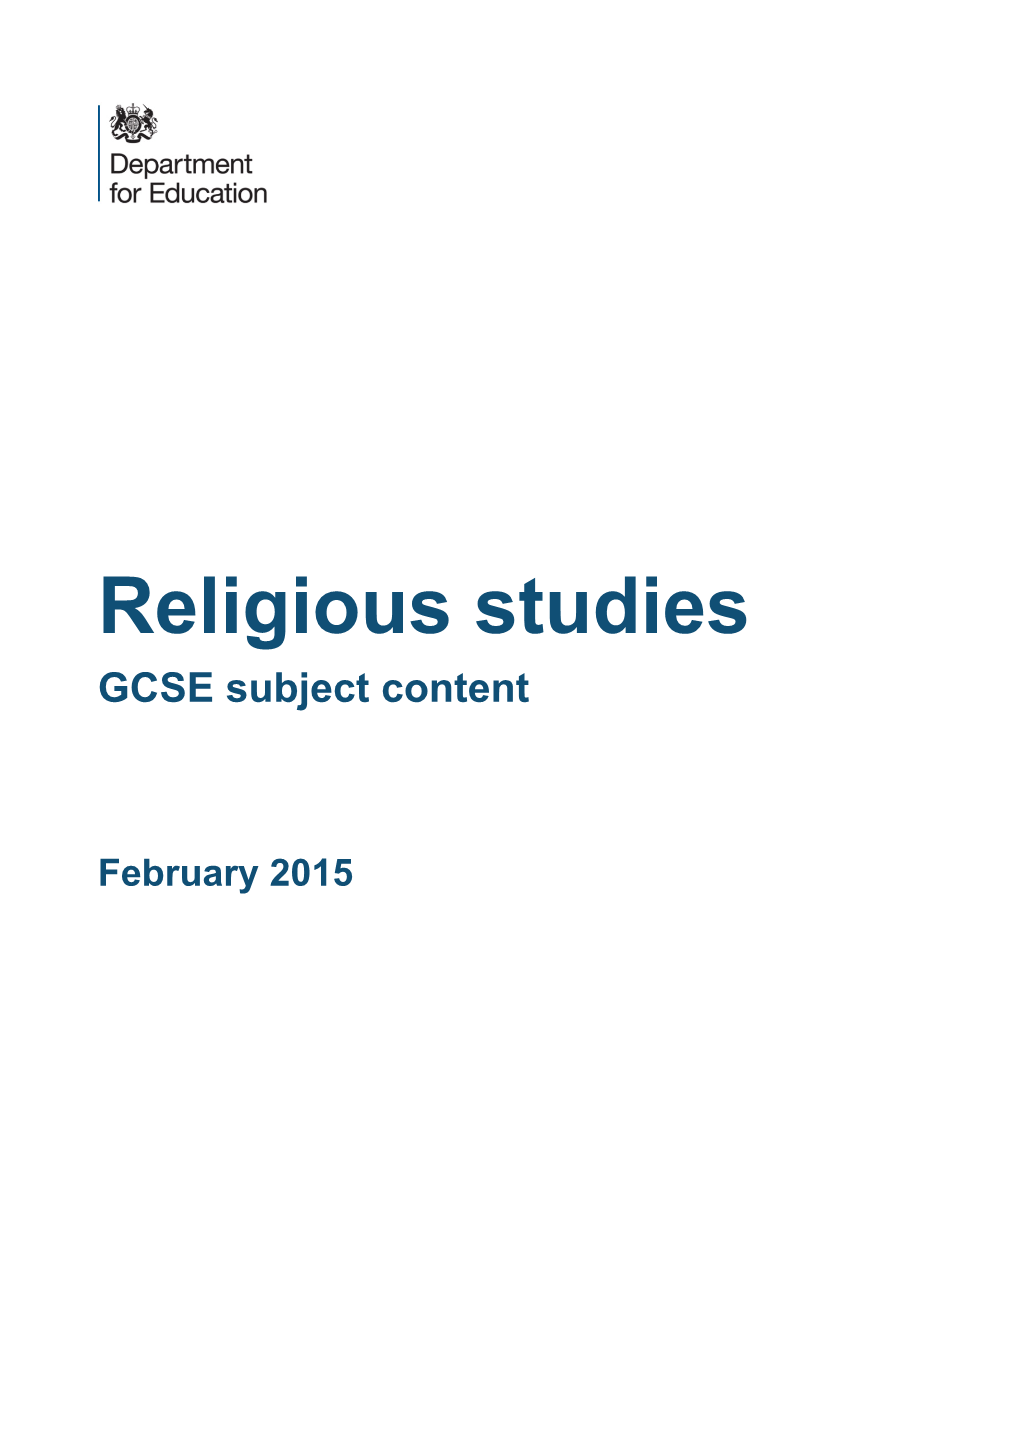 GCSE Religious Studies Short Courses Will Be Half the Content of the GCSE Full Course